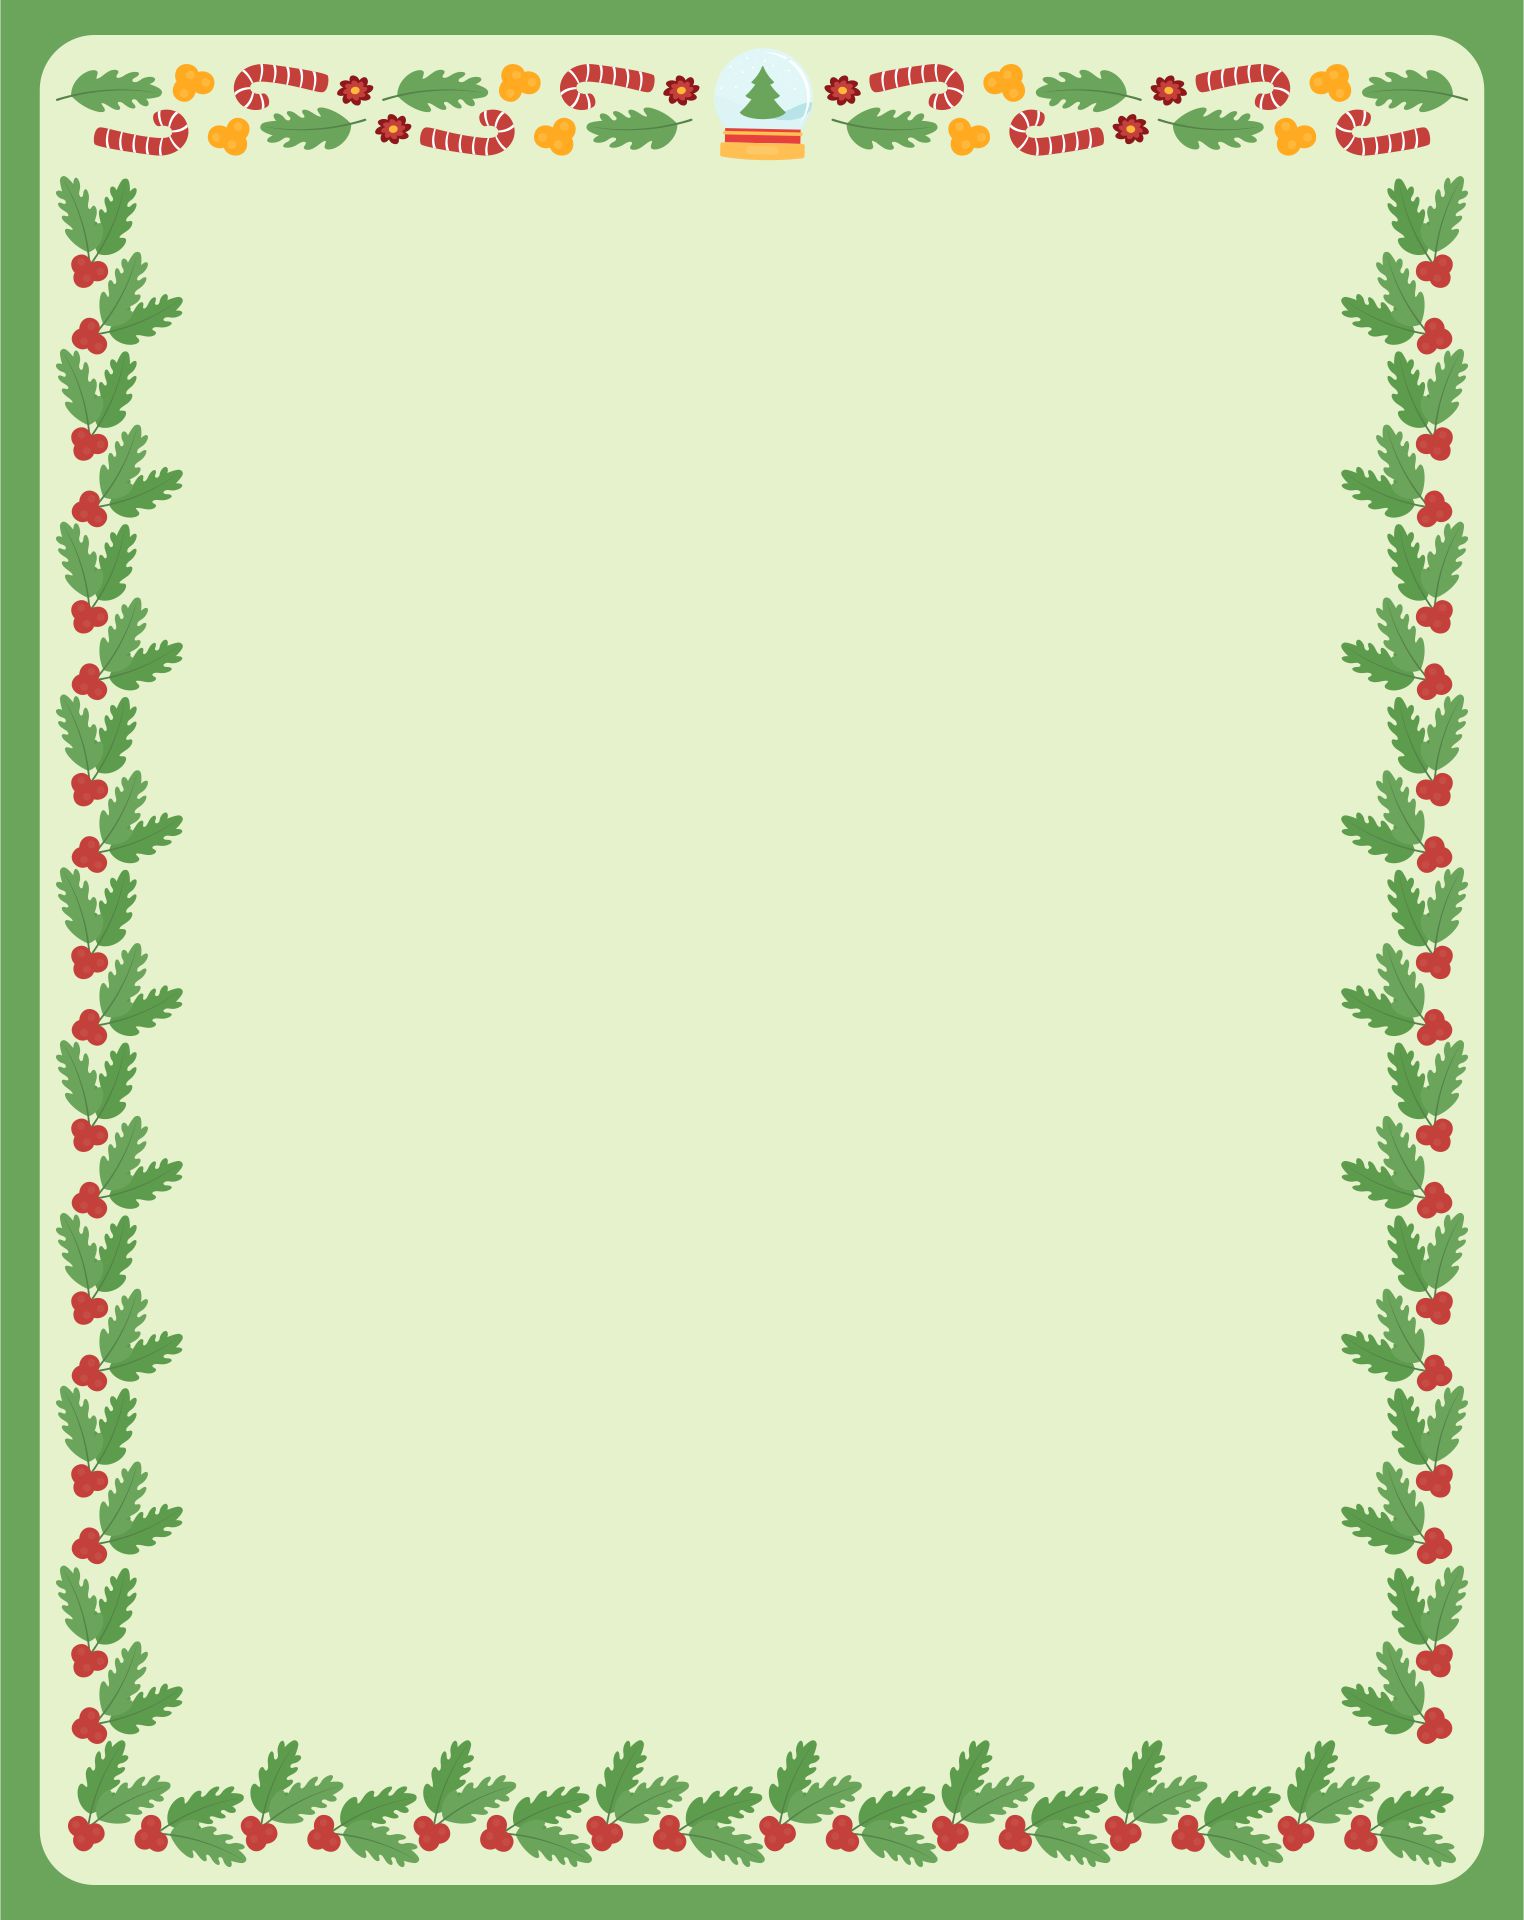 15 Best Free Printable Christmas Borders For Flyers